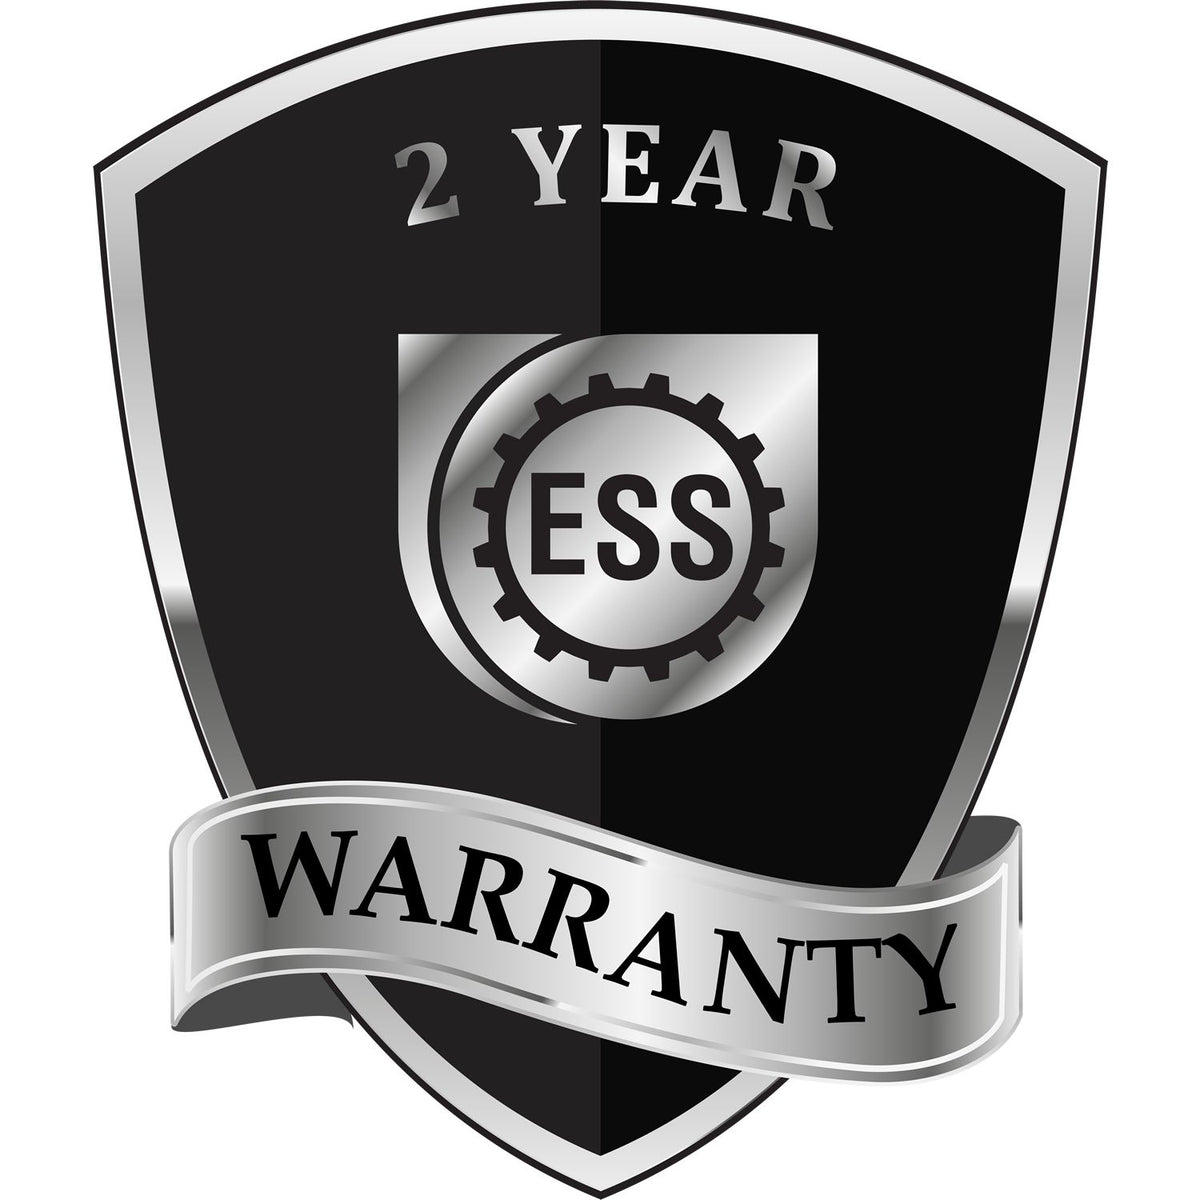 A black and silver badge or emblem showing warranty information for the Gift Pennsylvania Land Surveyor Seal